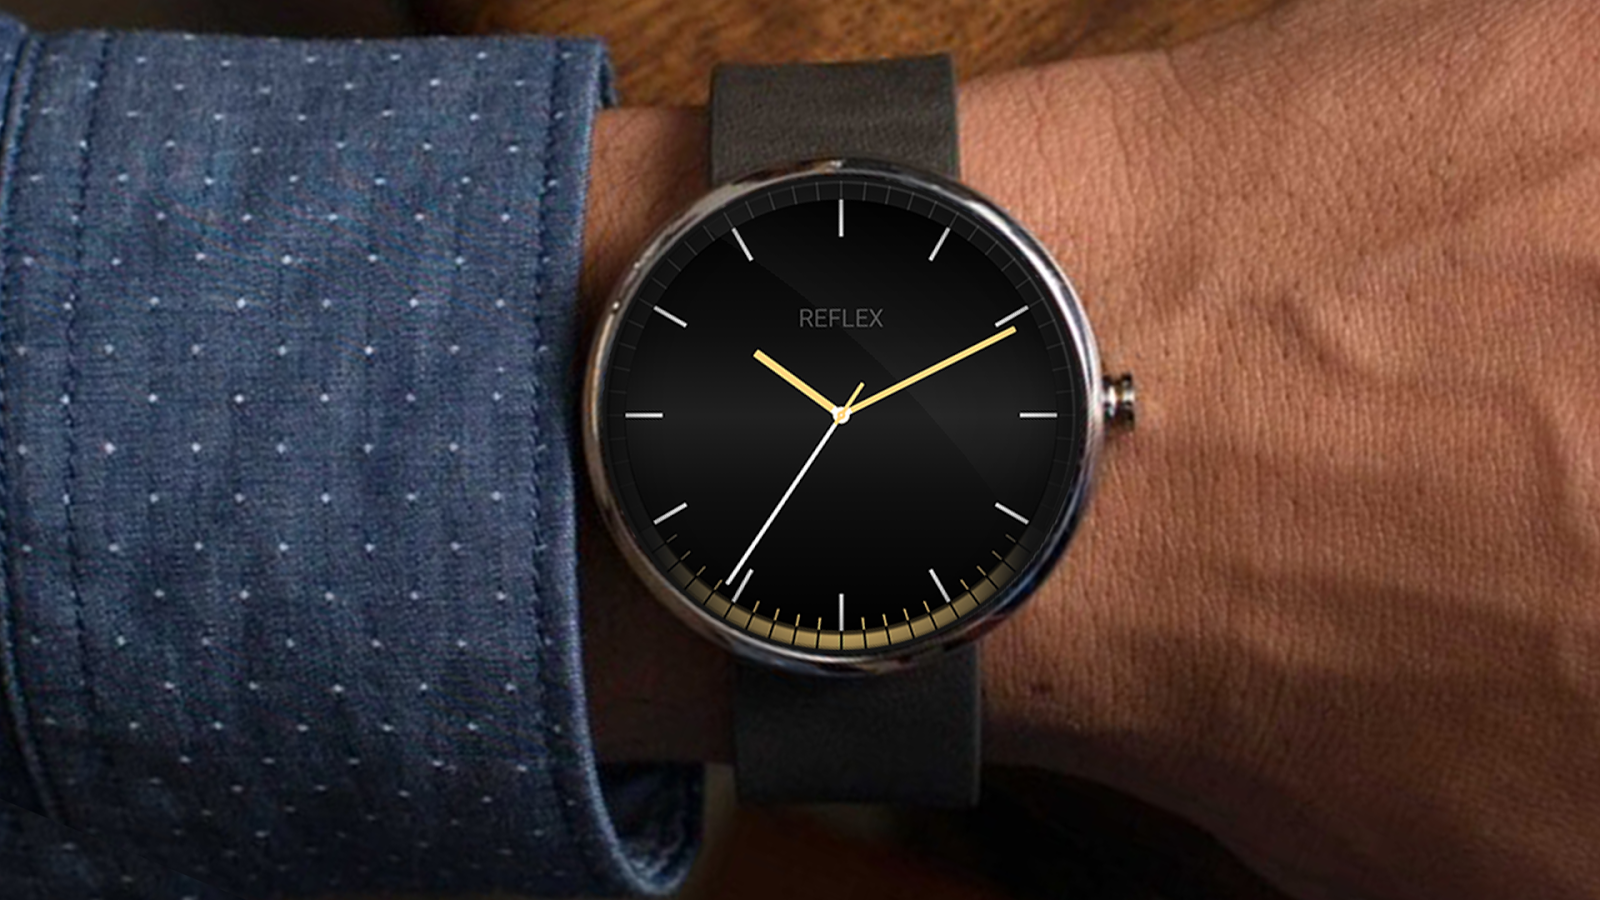 Creating a watch face with Android Wear API | Part 1